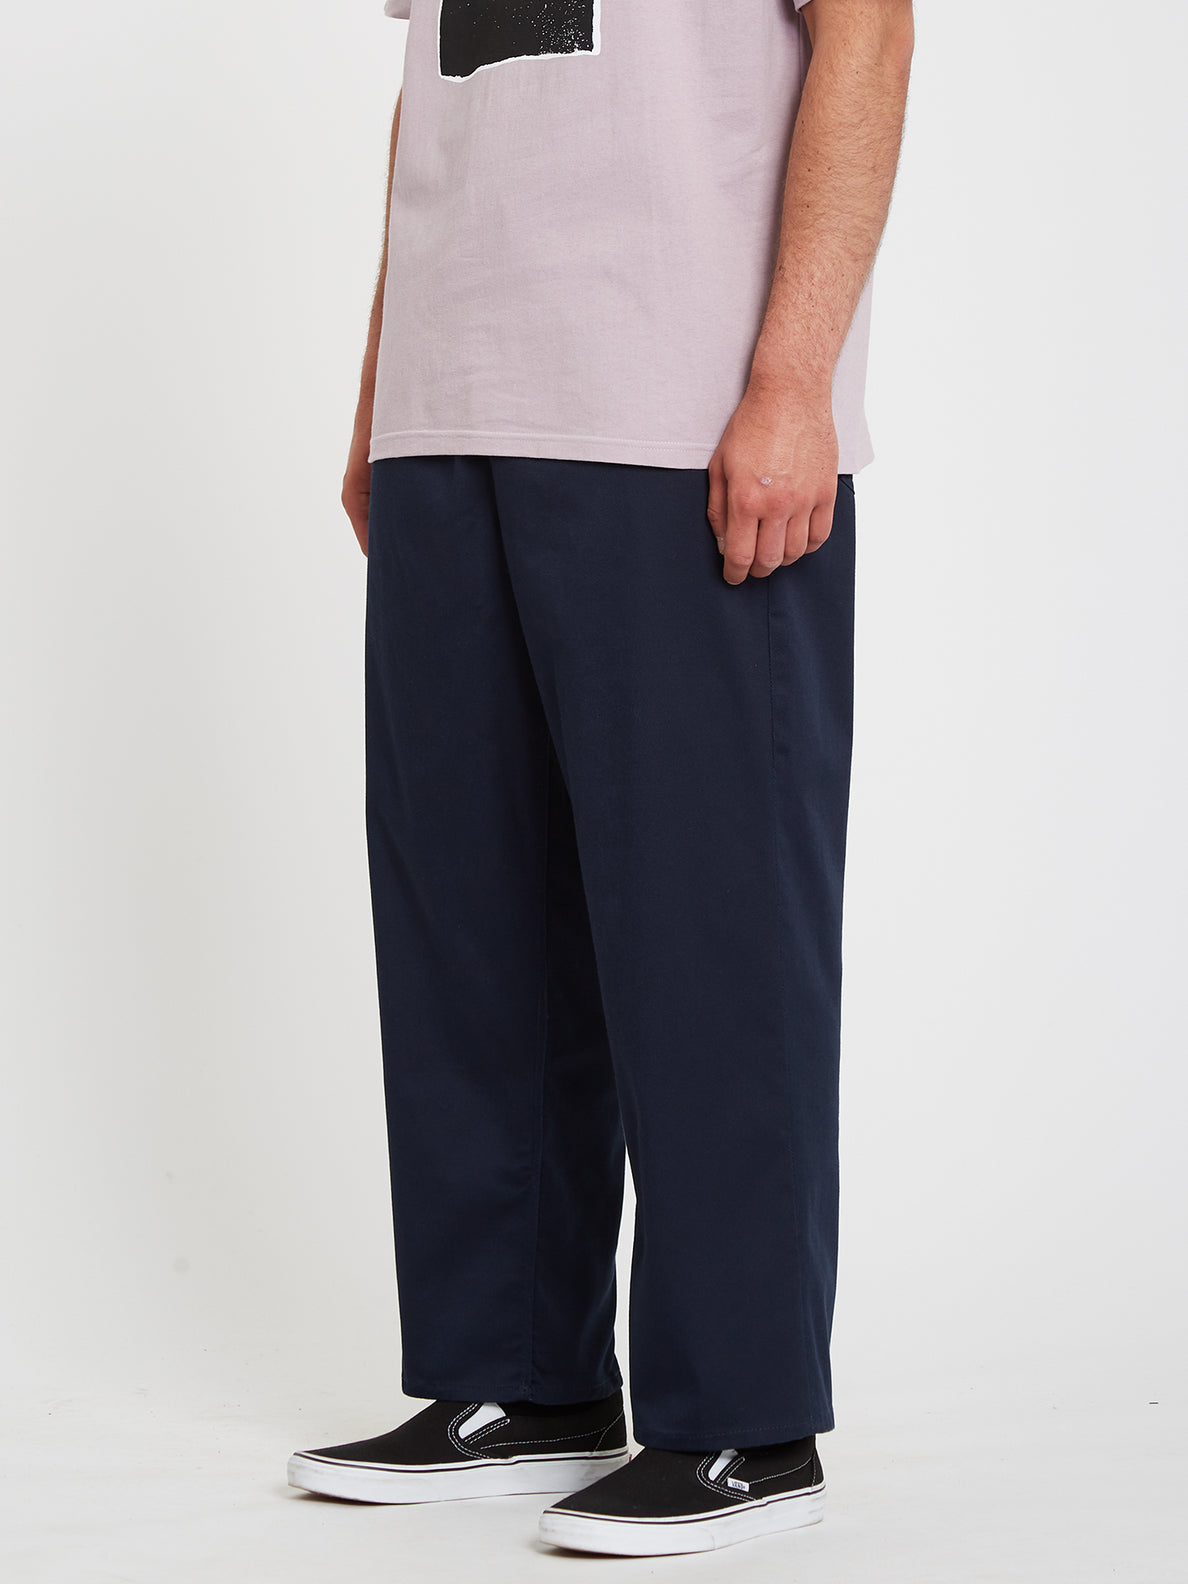 Outer Spaced Solid Ew Pant Navy (A1242004_NVY) [1]